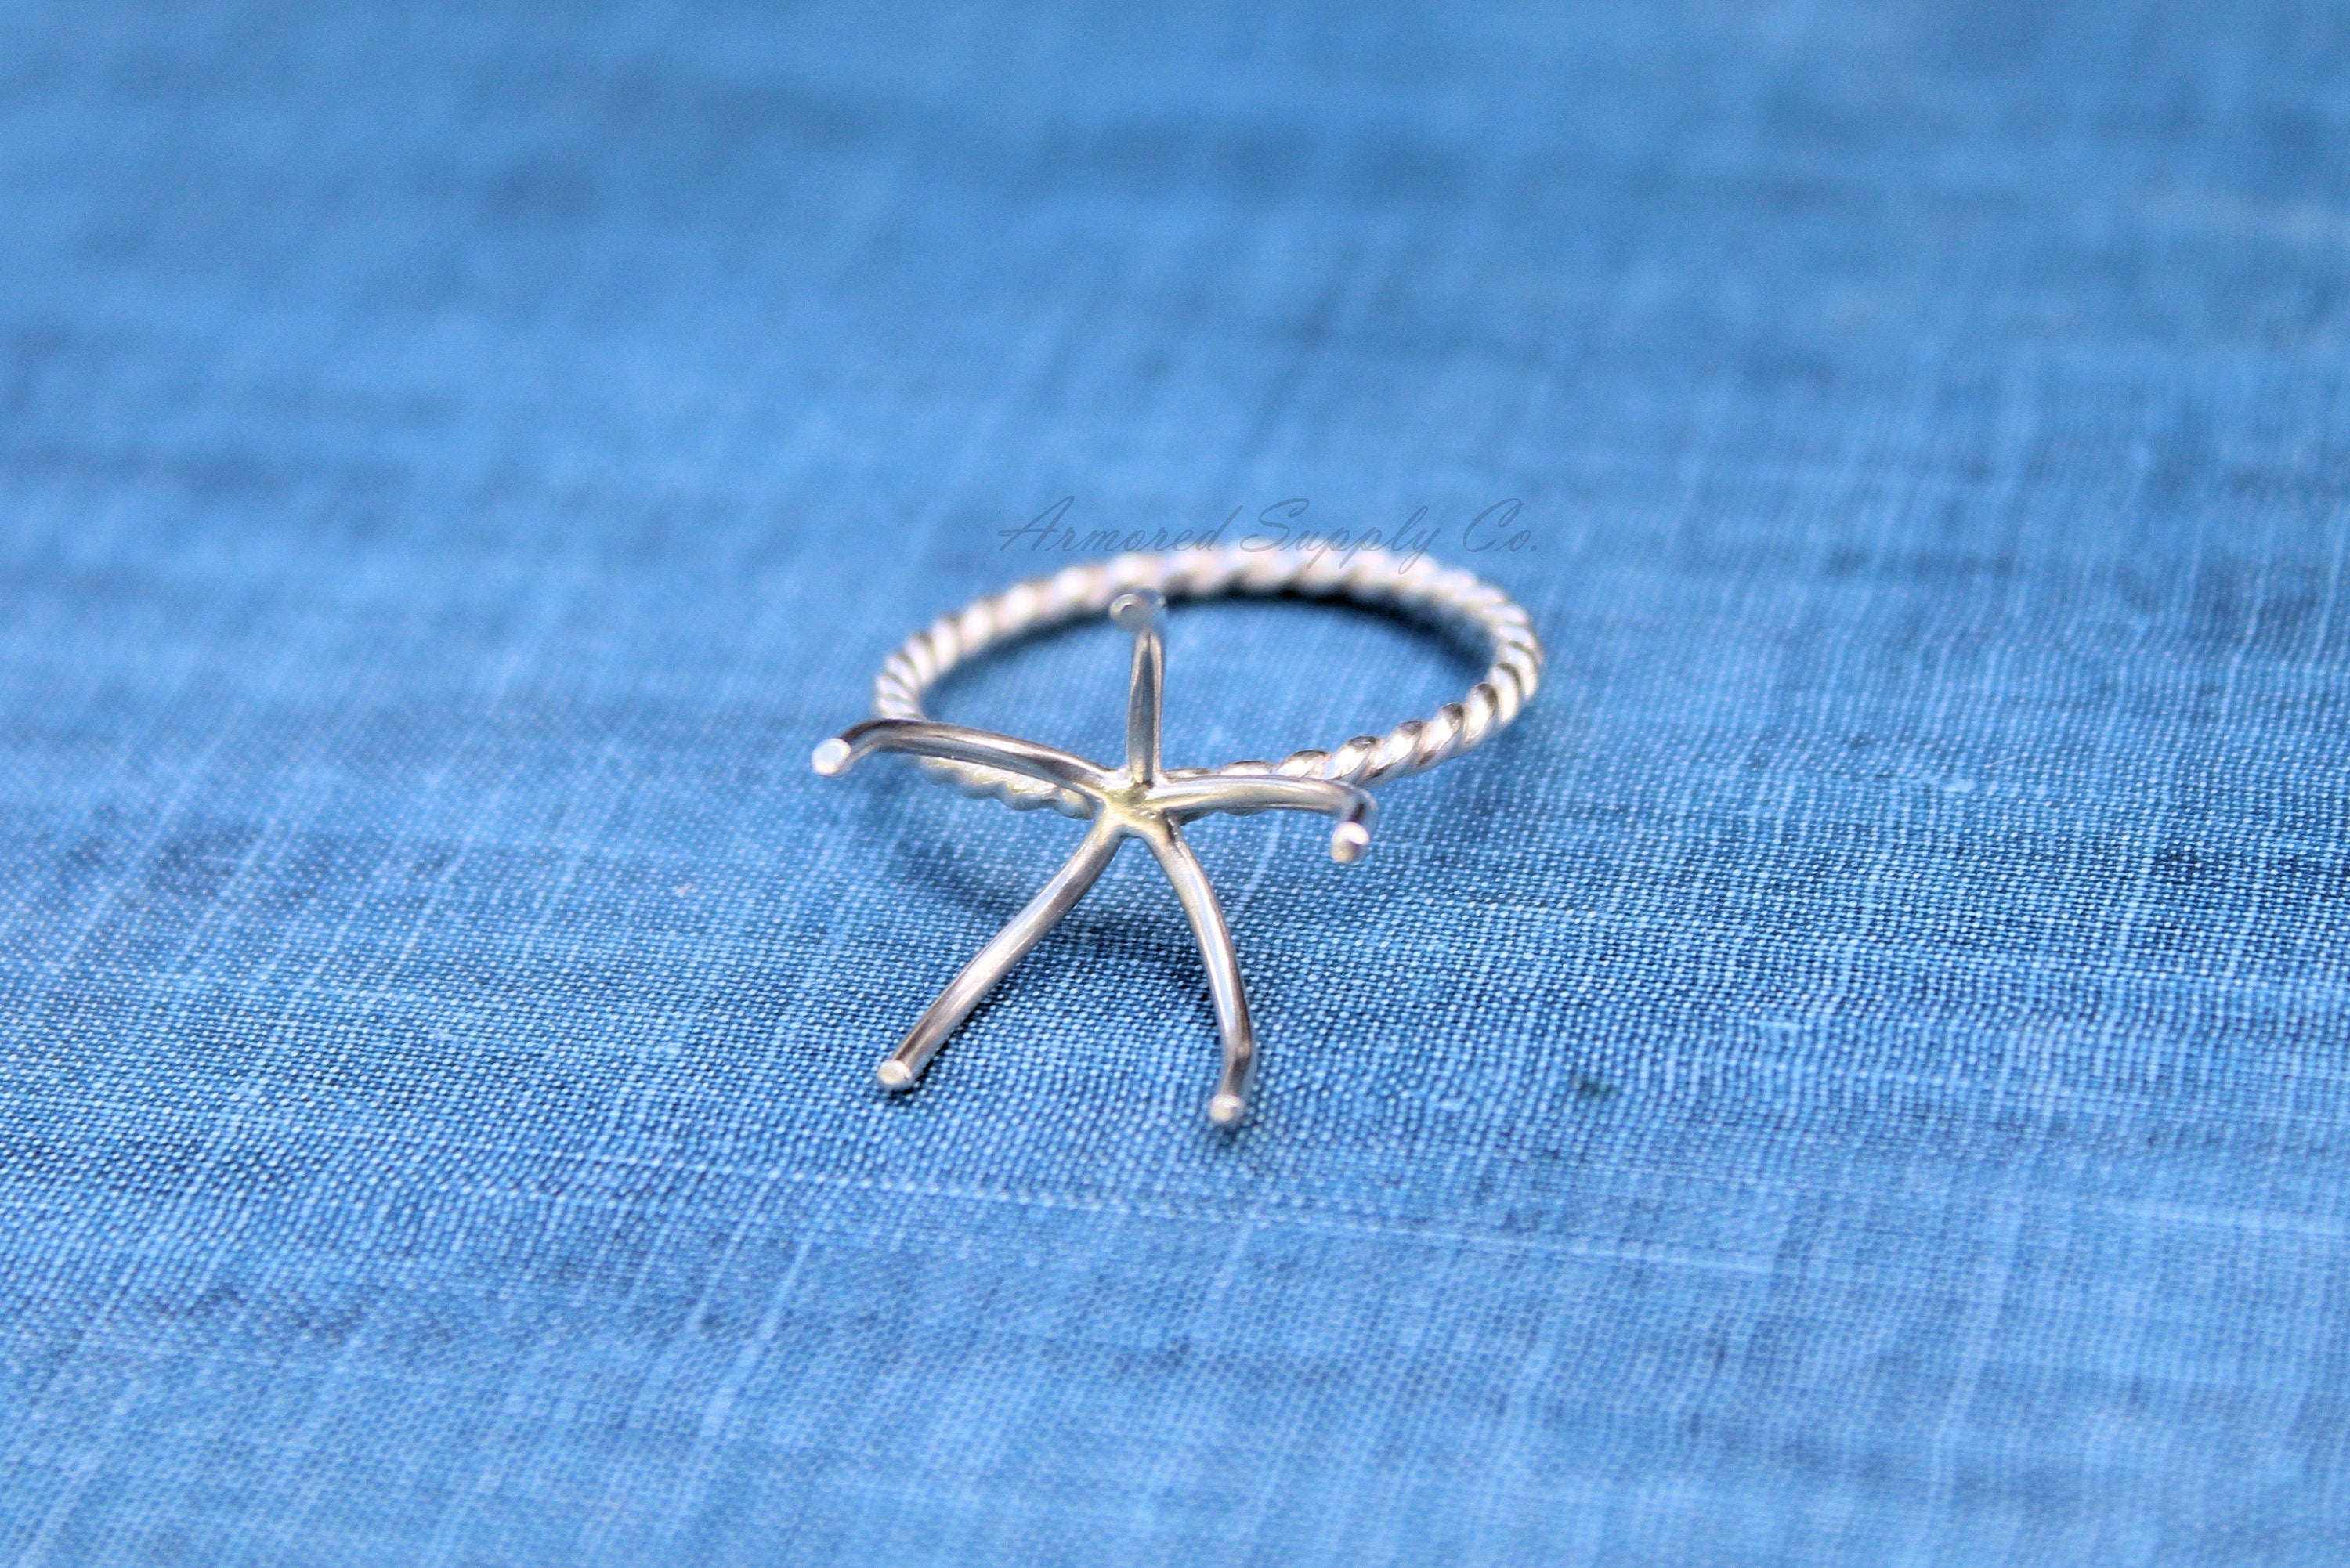 Claw Ring Blank 5 Prong Raw Stone Silver Band, Wholesale Ring, Ring Setting, Design Your Ring, DIY Jewelry, Ring Blanks, Jewelry Supplies